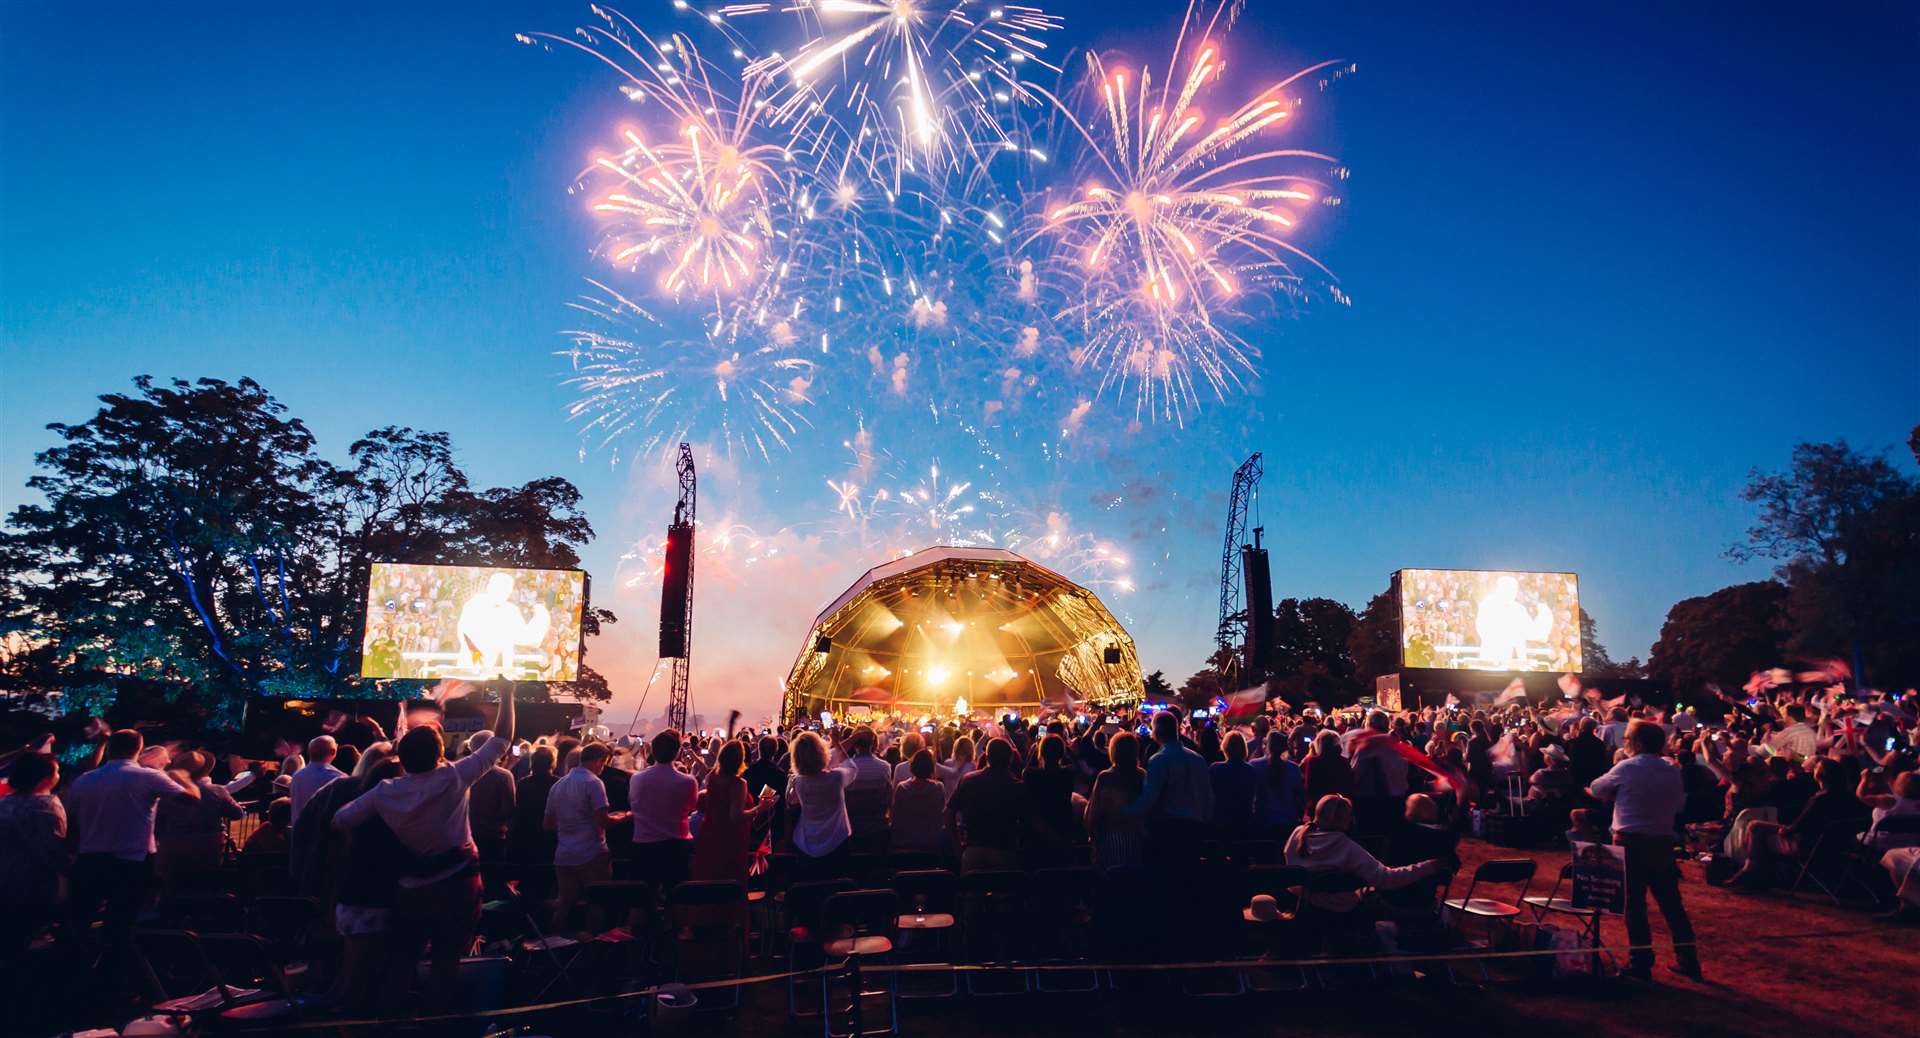 There will be a firework finale at the classical concert